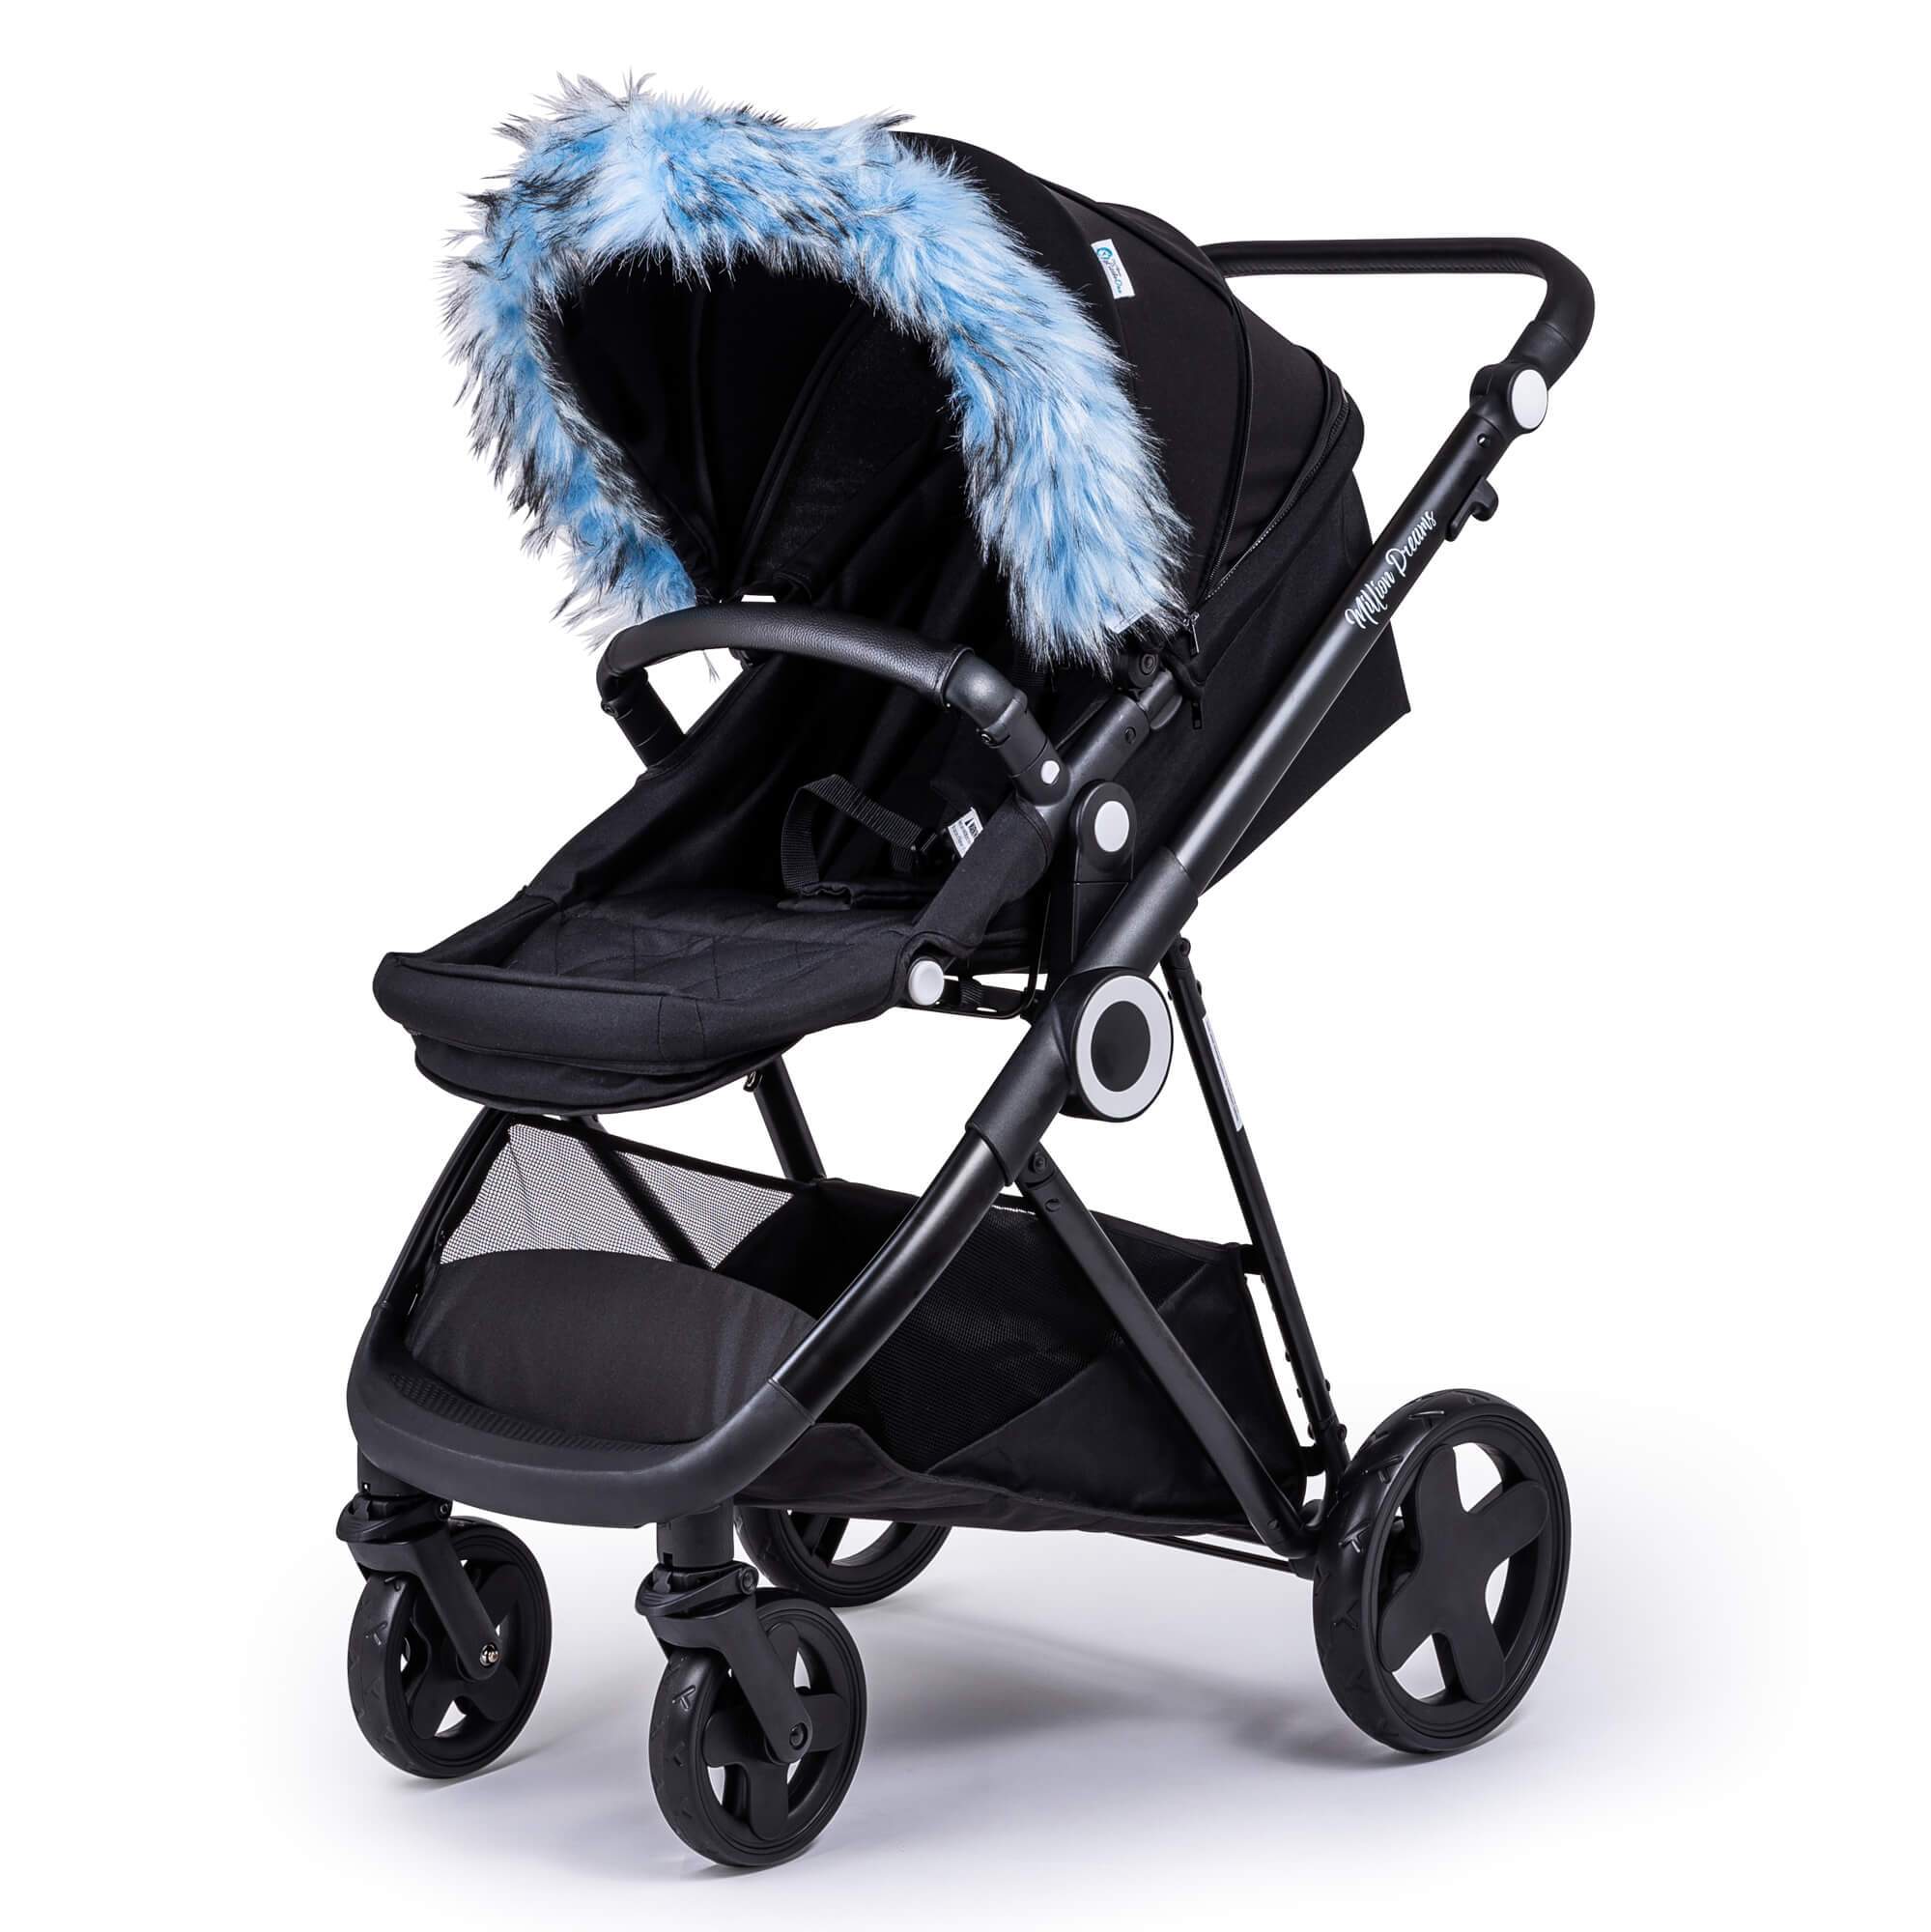 Pram Fur Hood Trim Attachment for Pushchair Compatible with Obaby - Light Blue / Fits All Models | For Your Little One